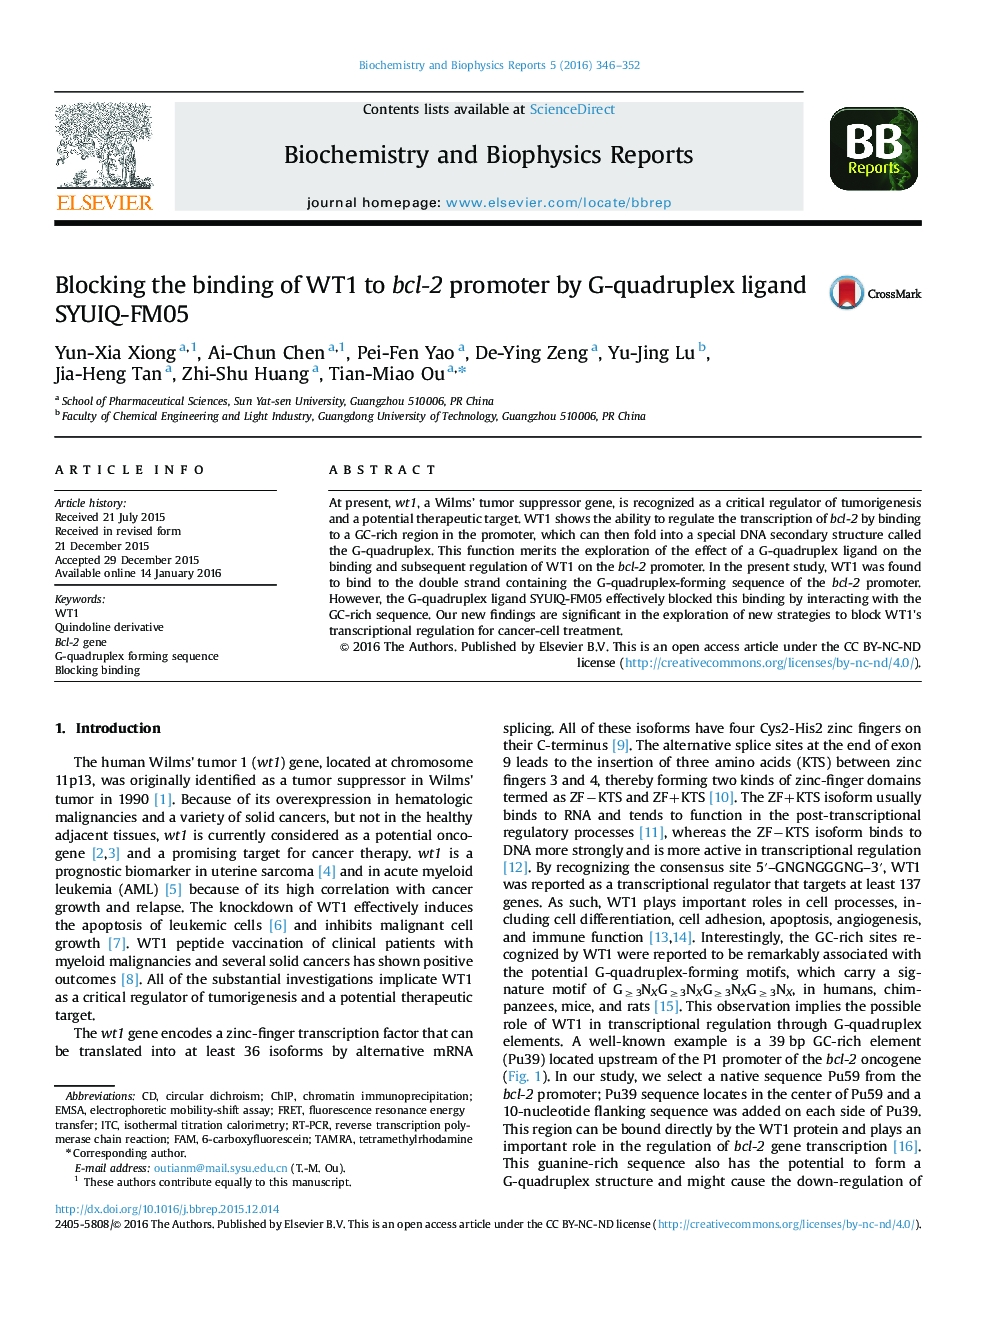 Blocking the binding of WT1 to bcl-2 promoter by G-quadruplex ligand SYUIQ-FM05